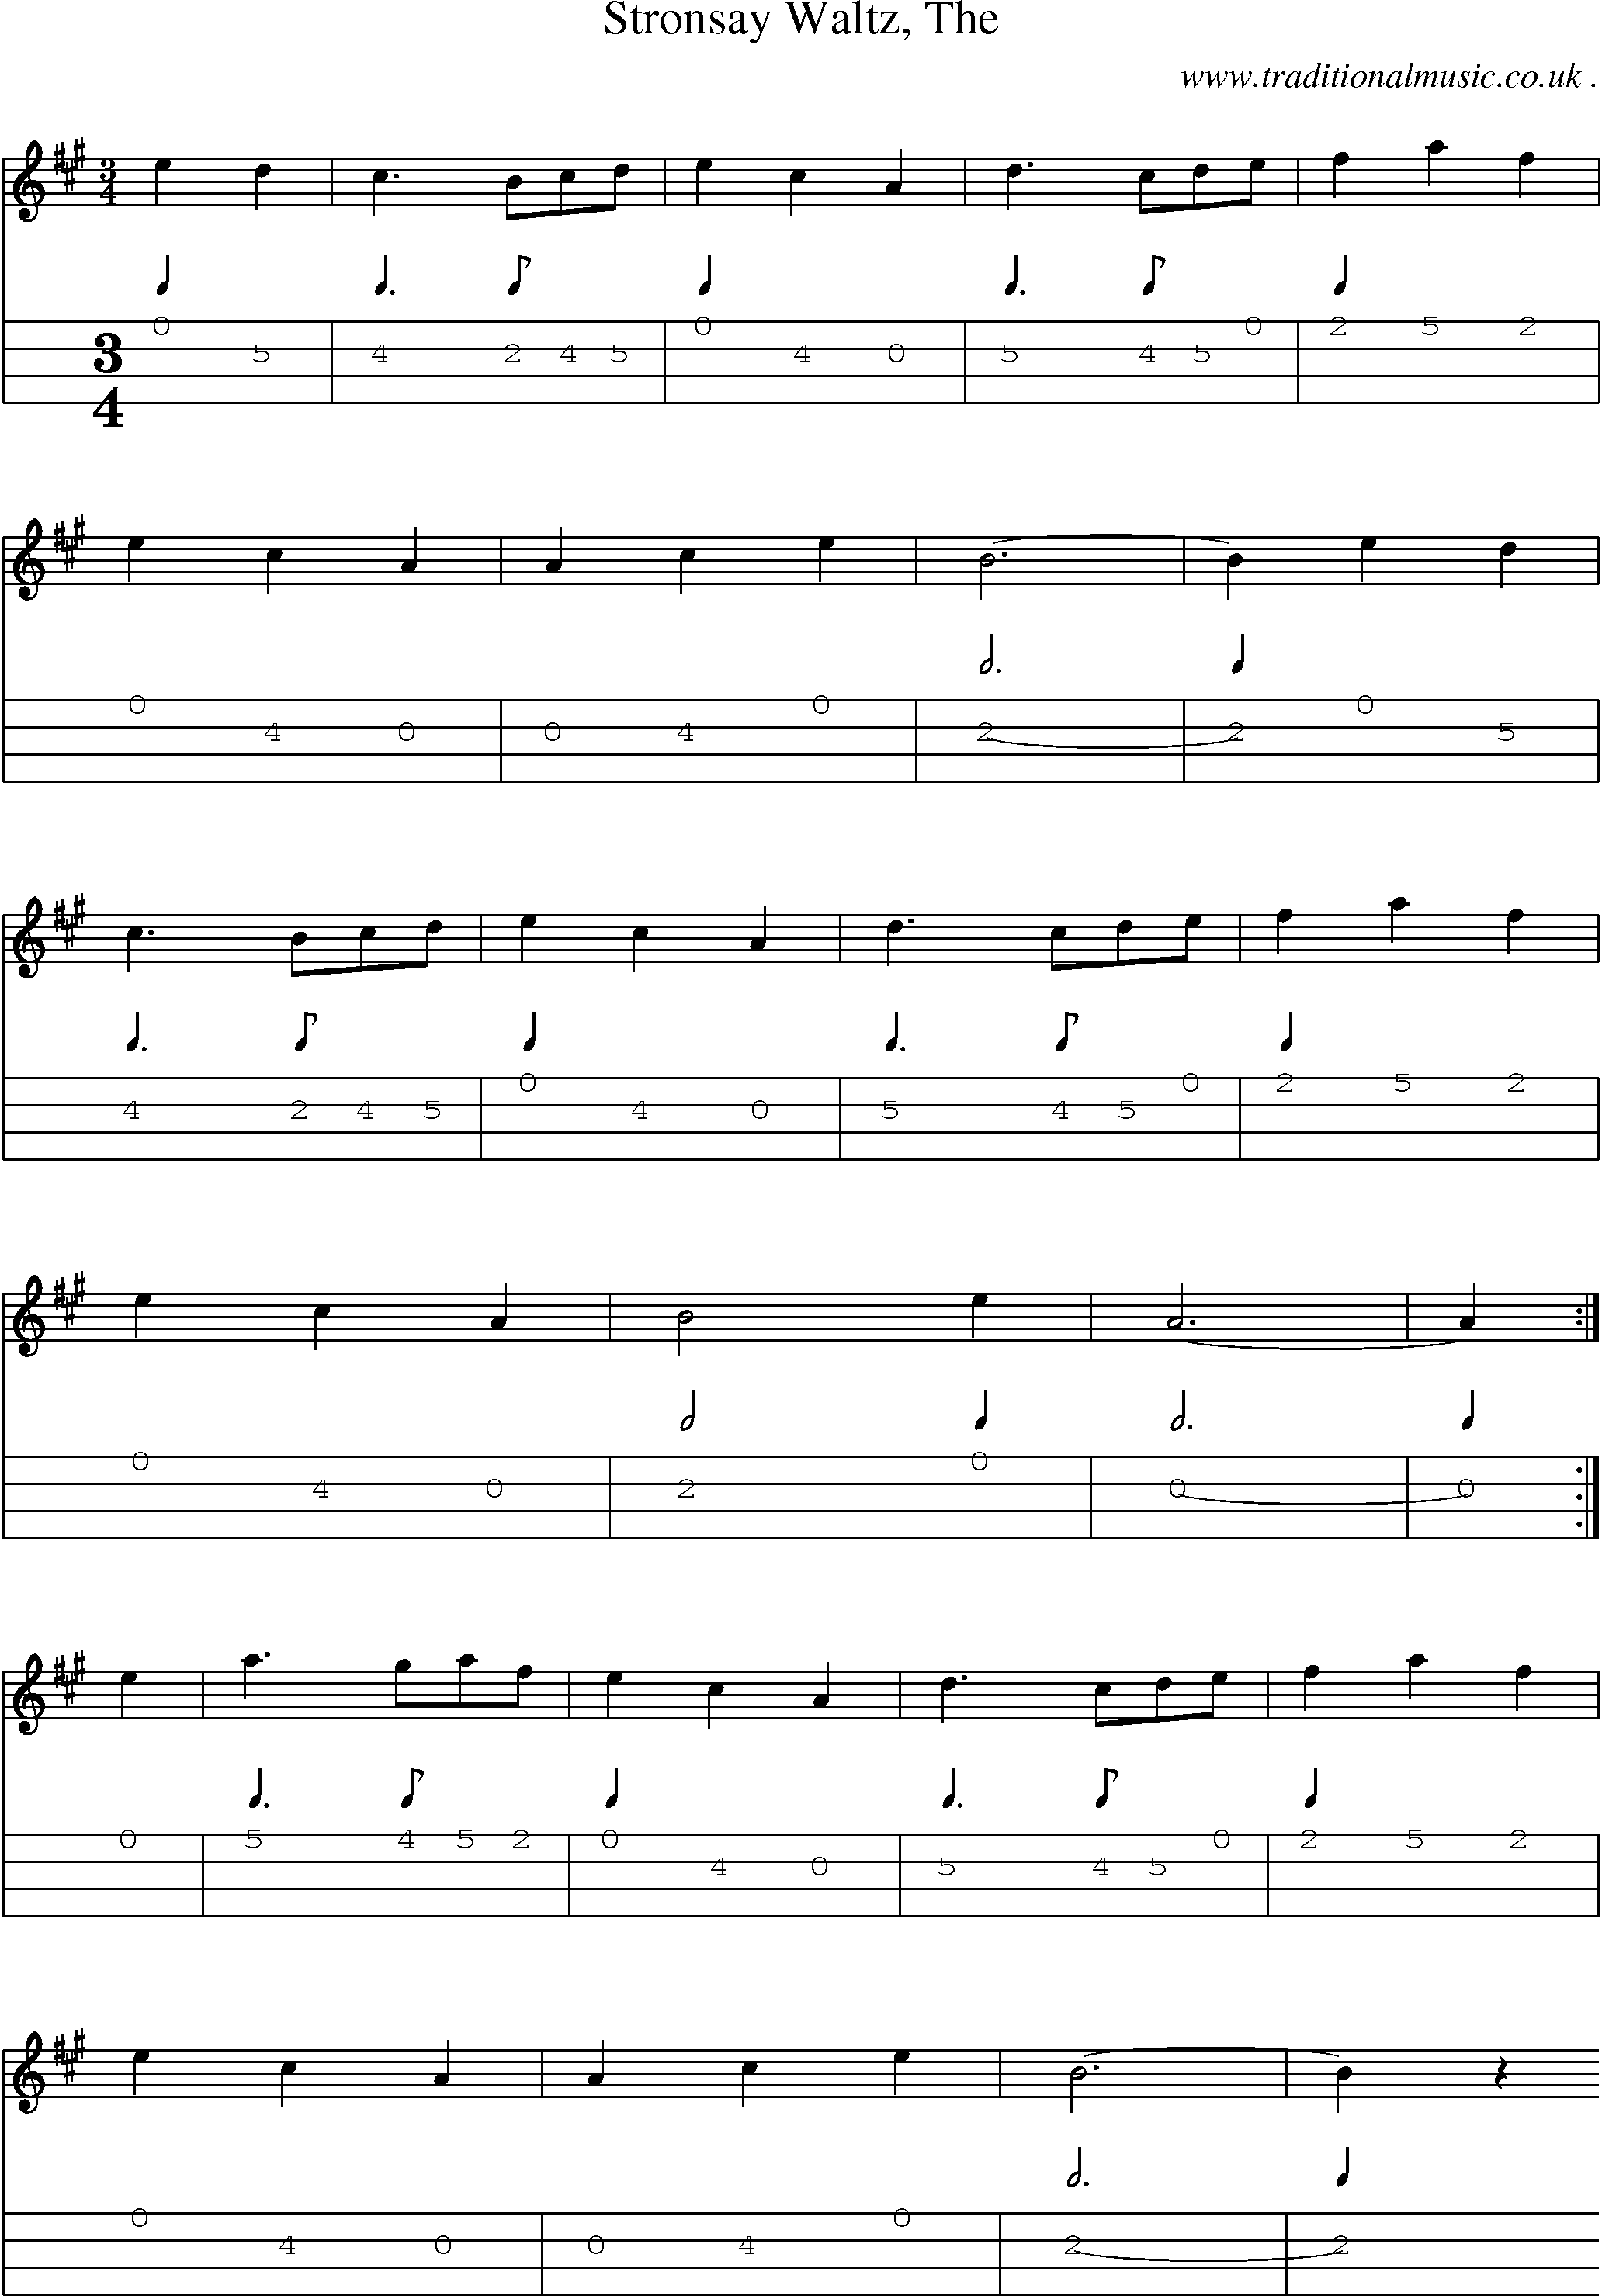 Sheet-music  score, Chords and Mandolin Tabs for Stronsay Waltz The